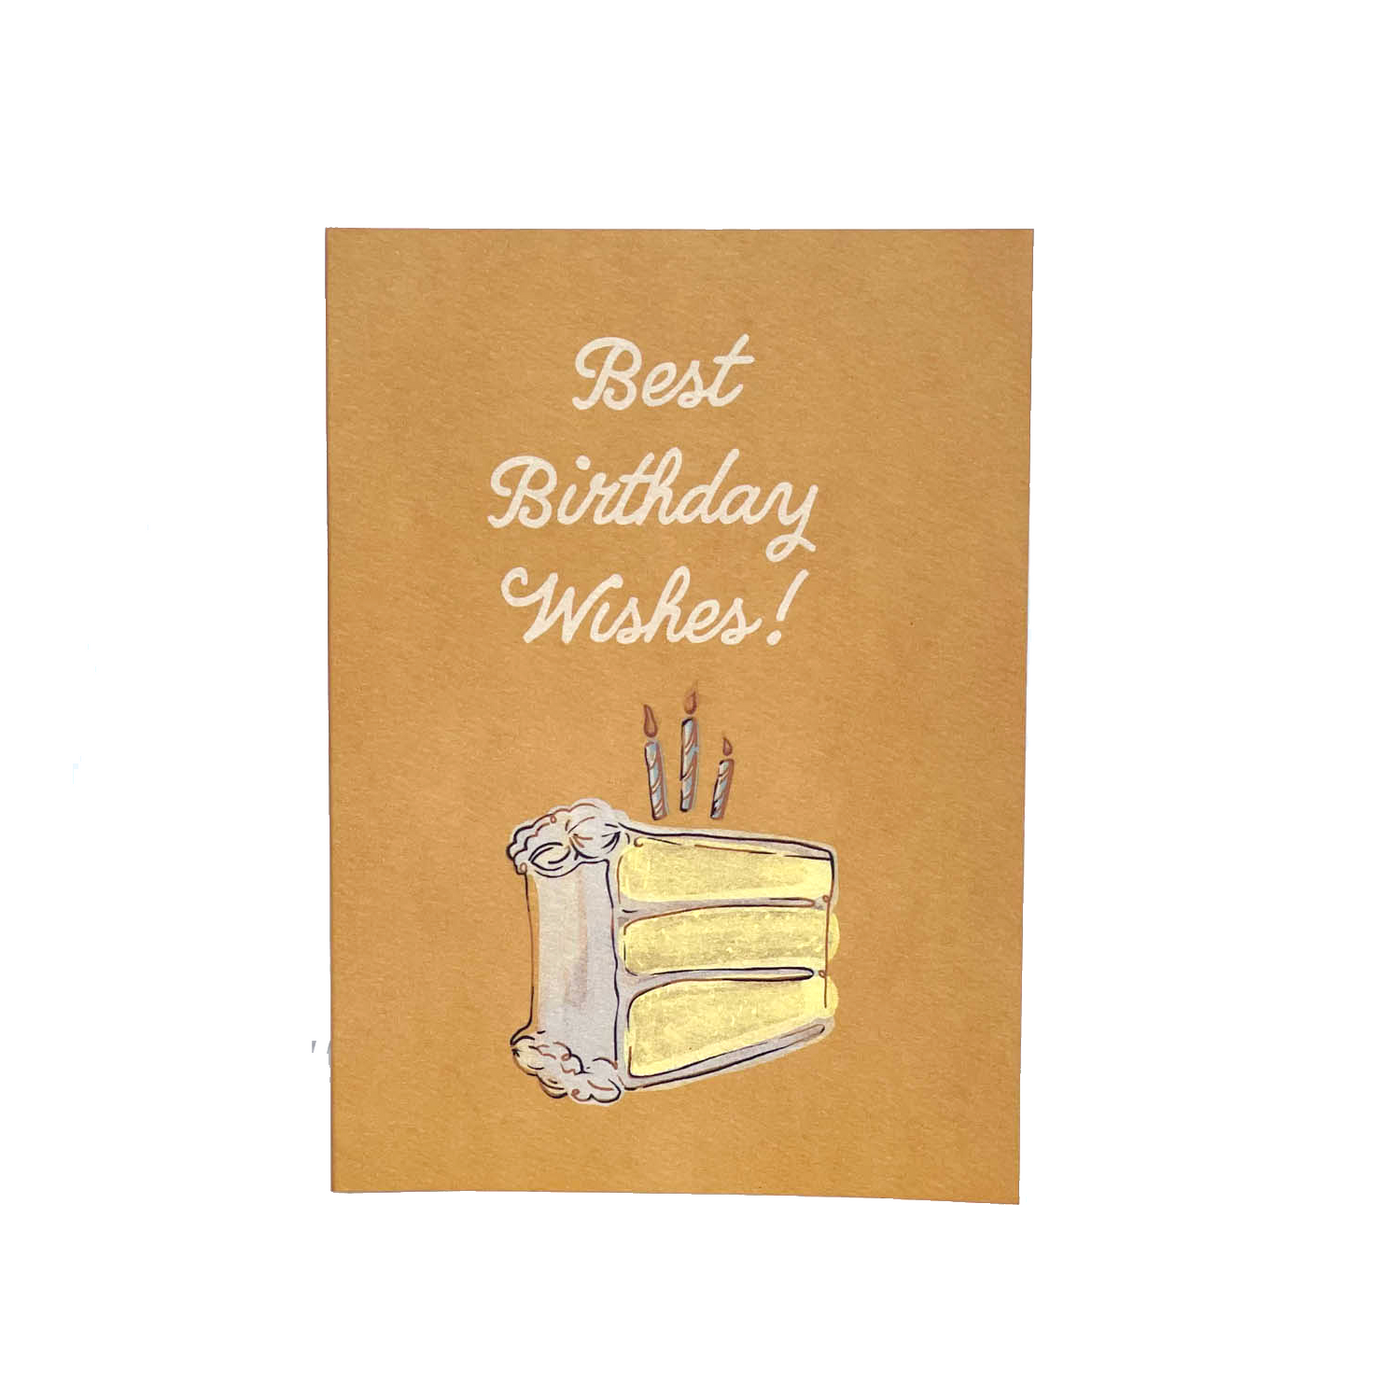 dark yellow best birthday wishes card that reads "Best birthday wishes!" with a slice of cake on cover